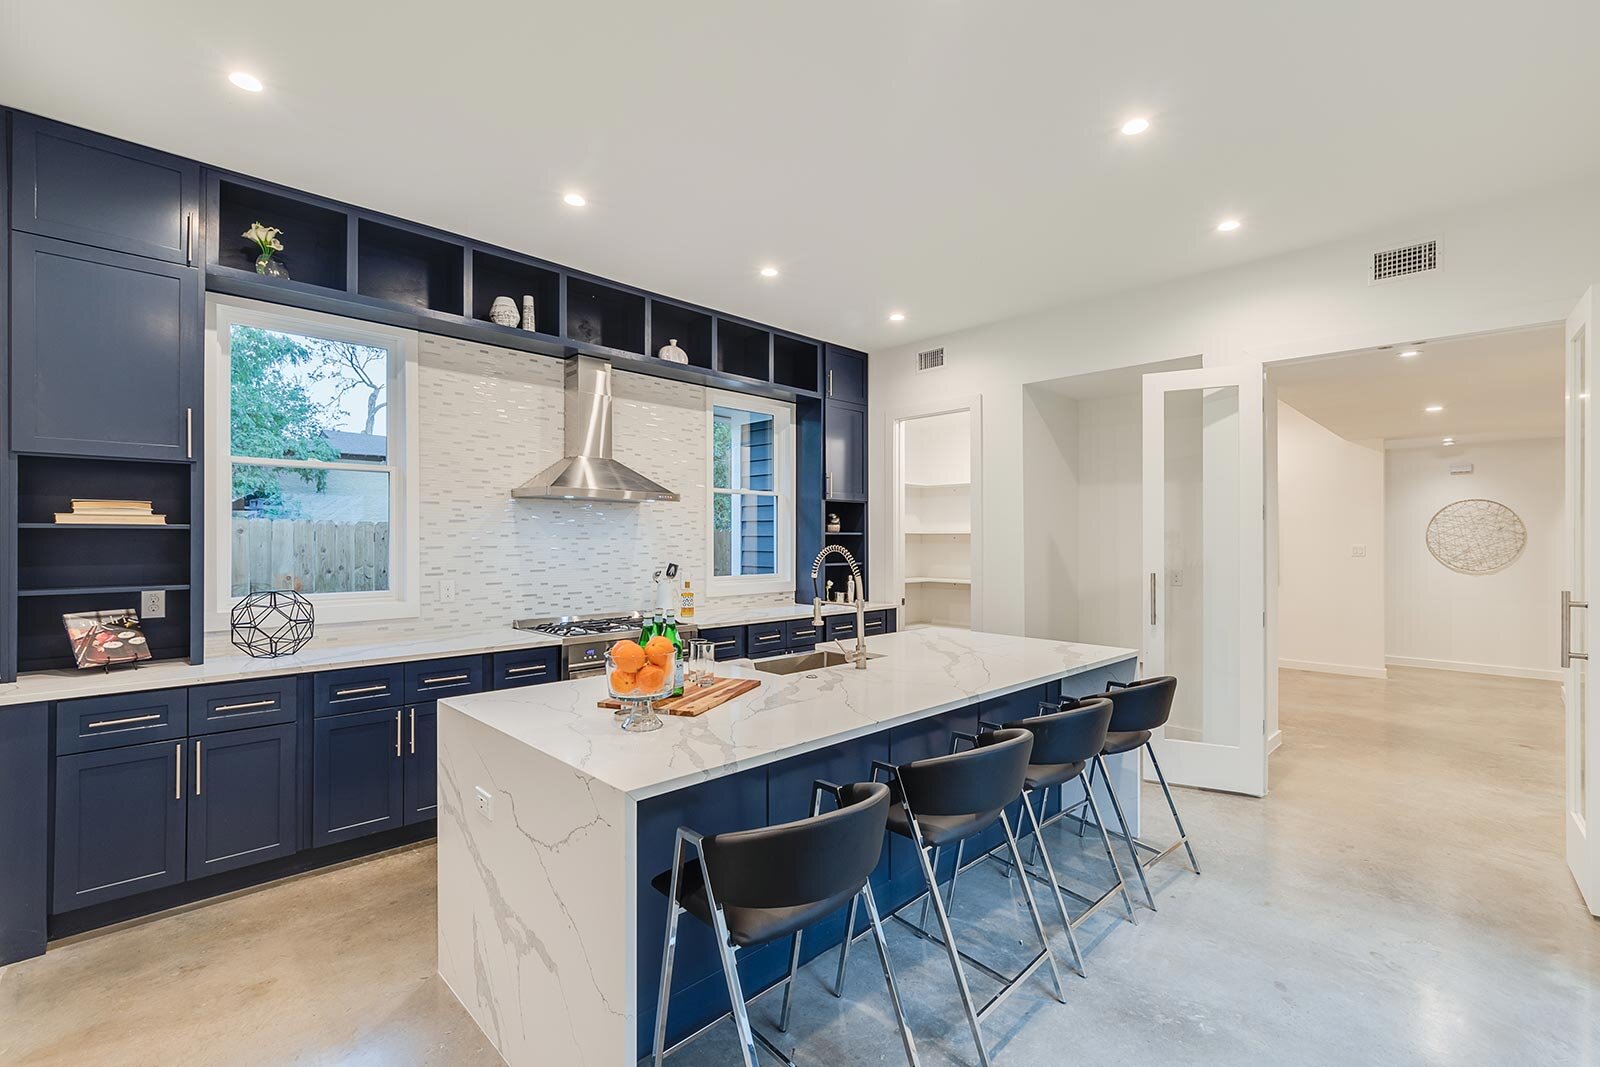 Clean white kitchen with an island and dark blue cabinets